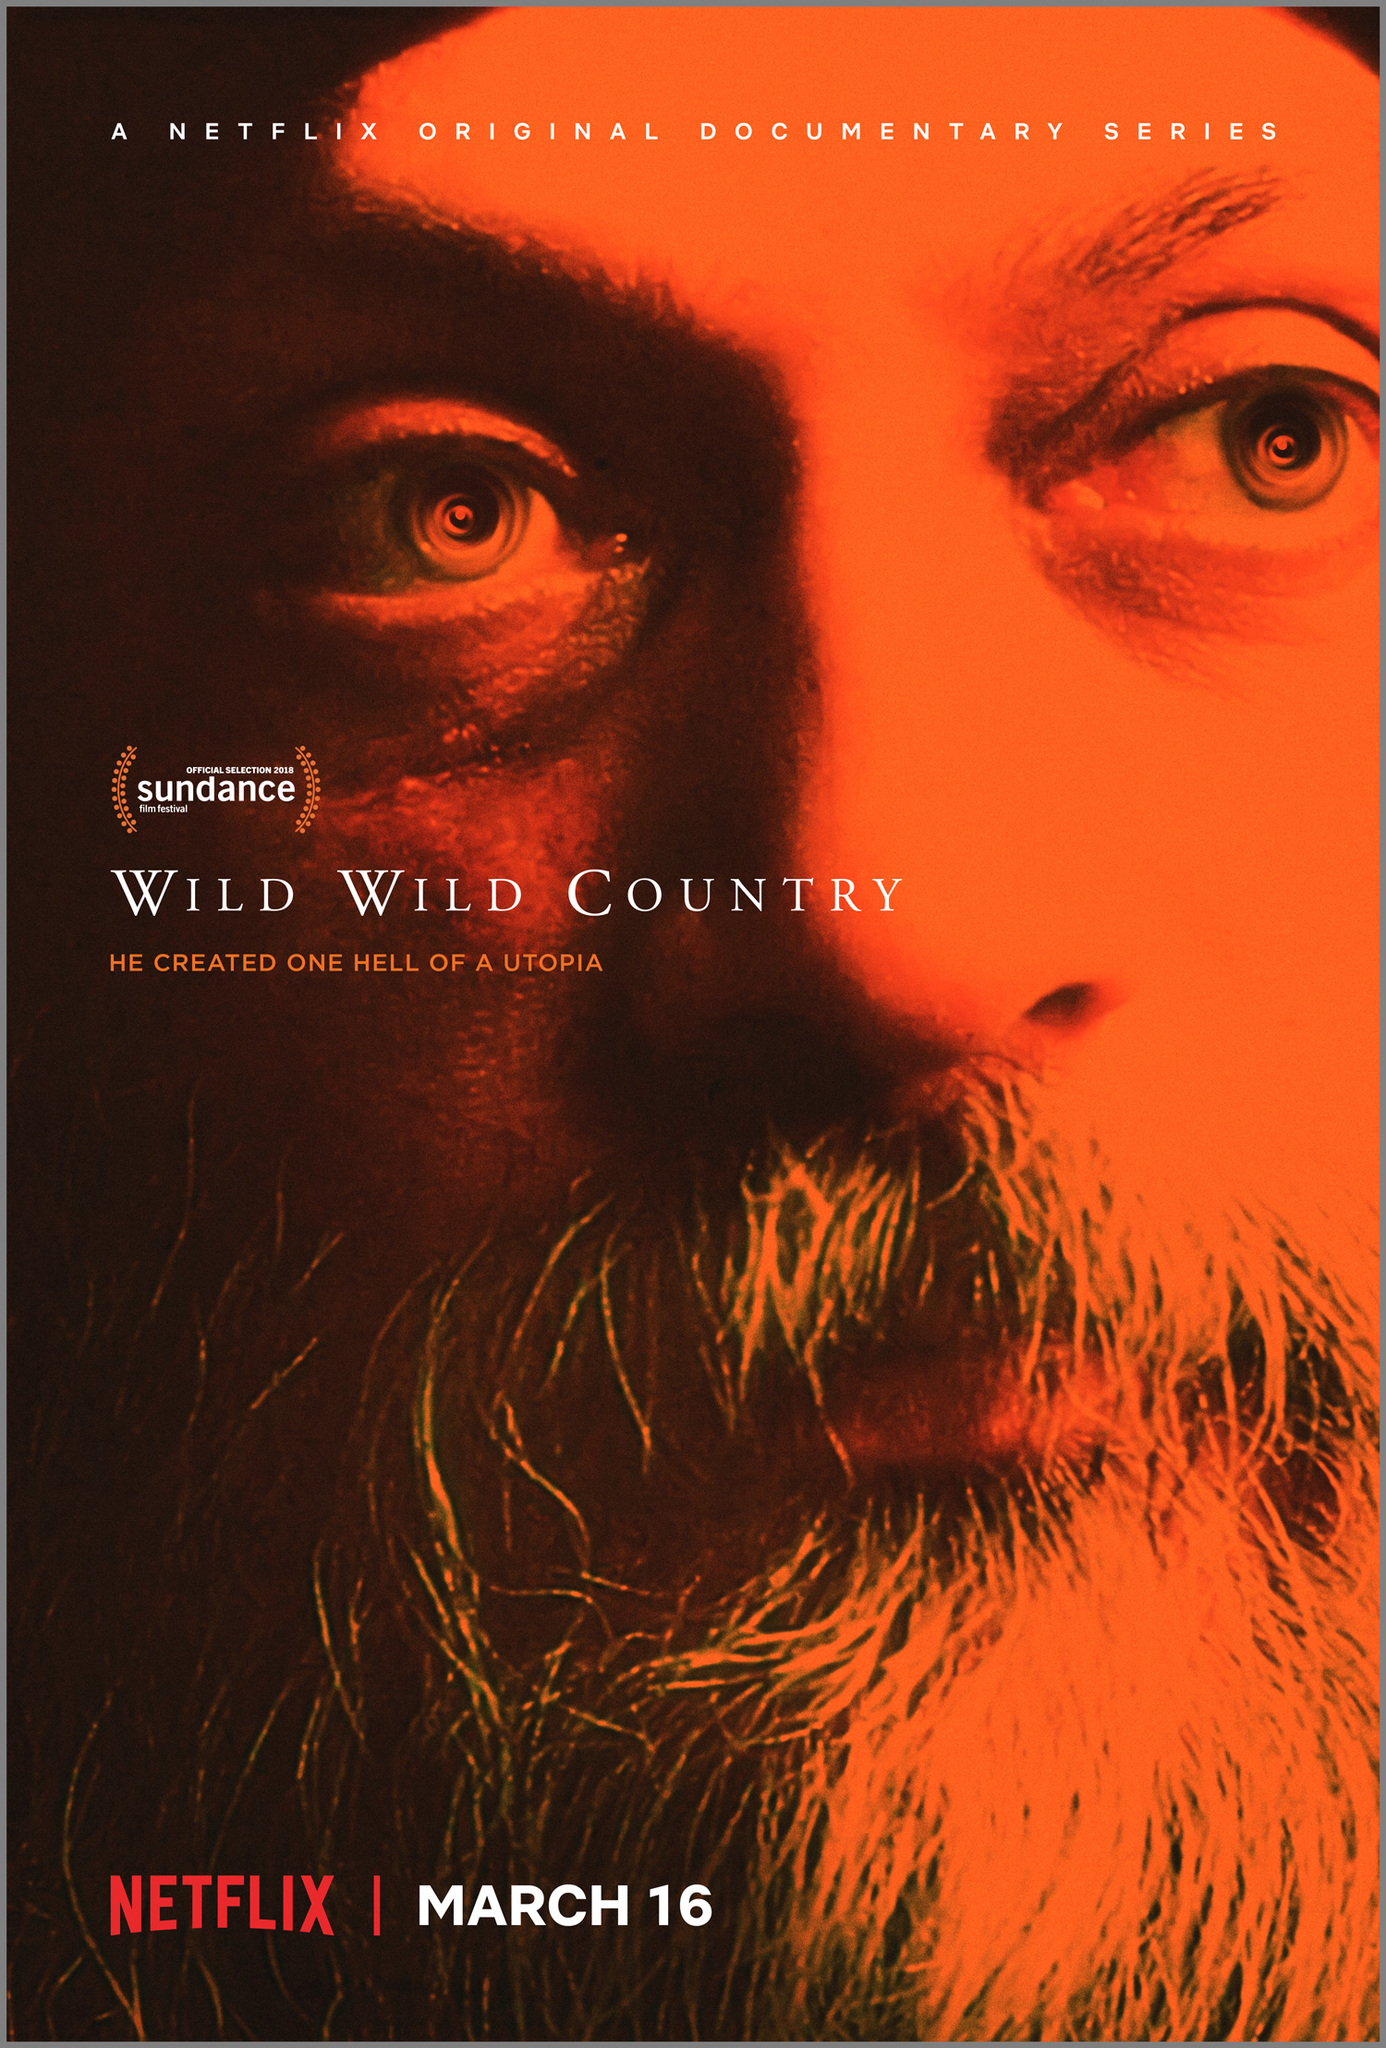 The New Docu-Series You Should Watch wild wild country